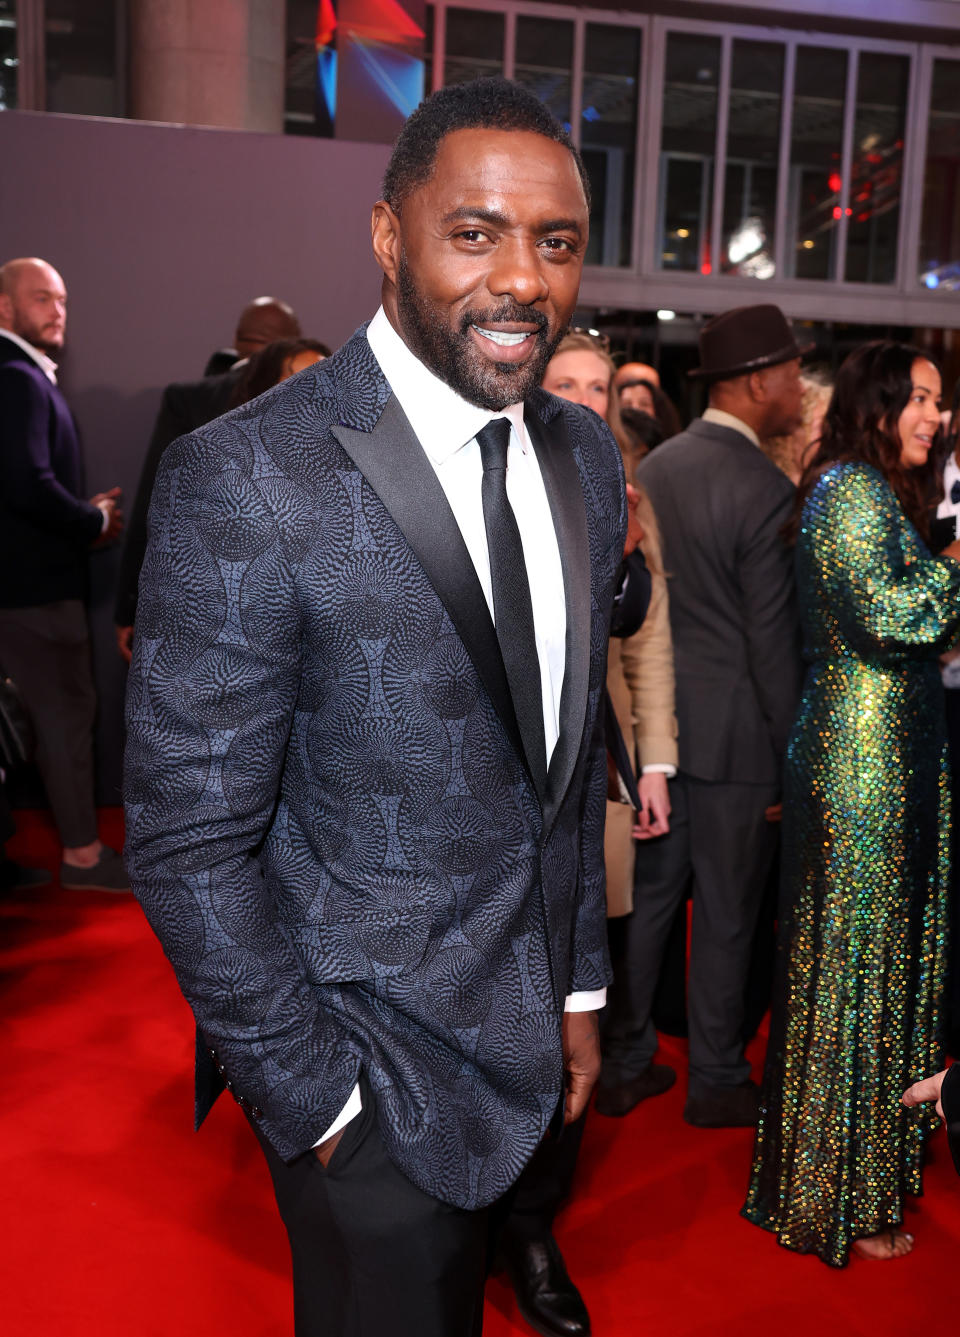 Idris Elba attends the BFI London Film Festival for the premiere of "The Harder They Fall"